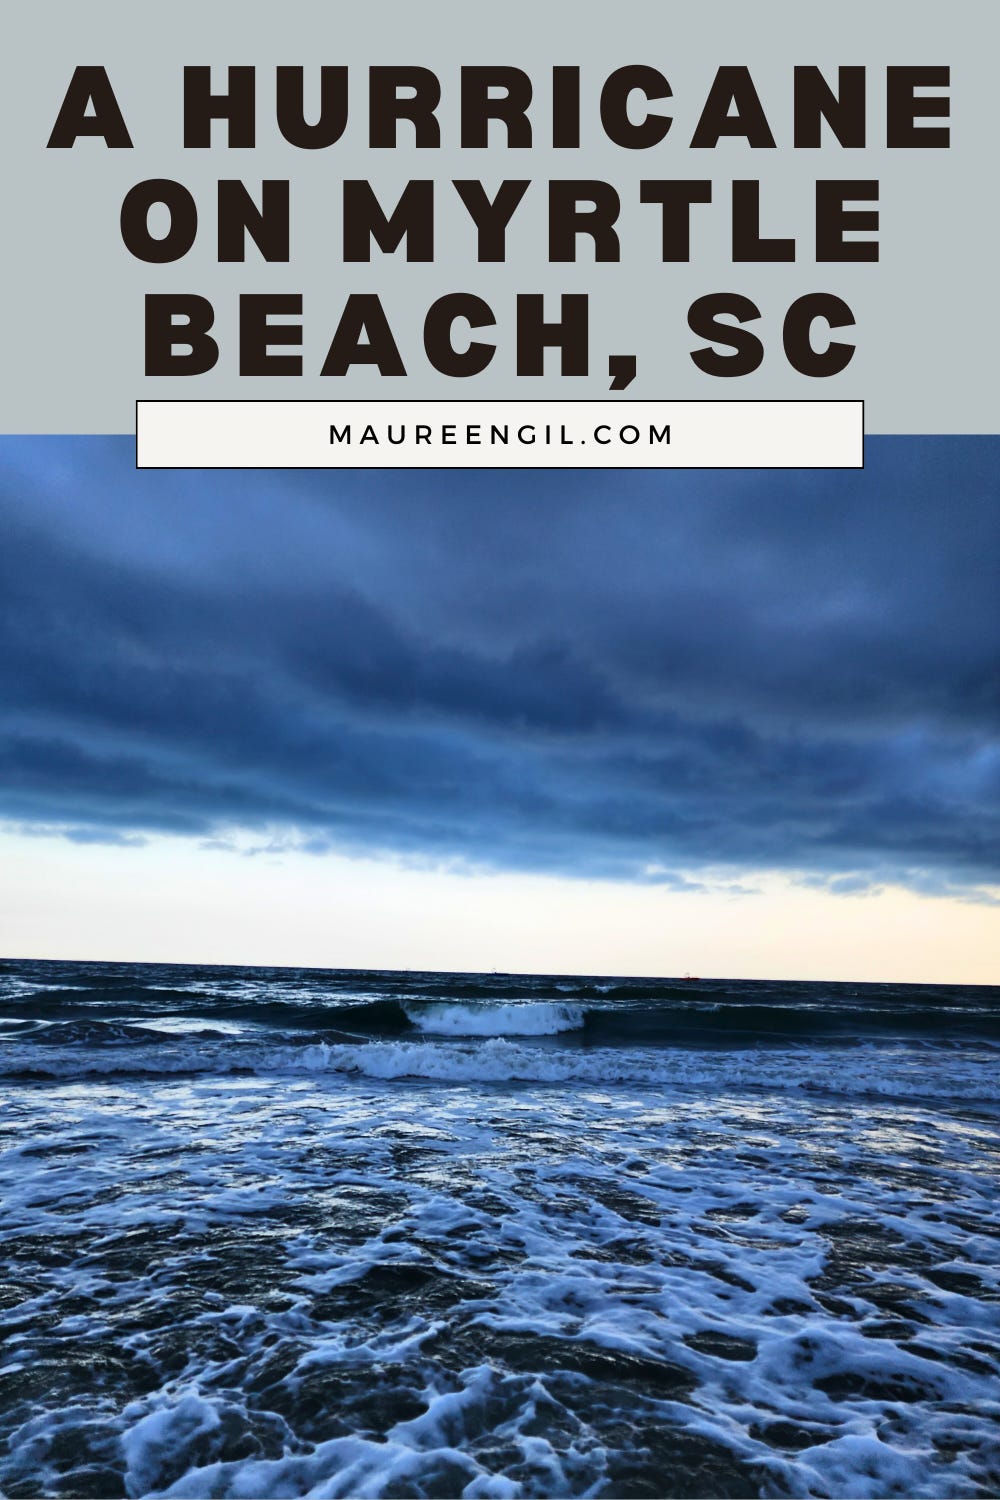 🌊 Surviving a hurricane on Myrtle Beach, SC! 😱 Check out my adventure battling the storm while on vacation. Mother Nature gave us quite the show. And spoiler alert, the only casualty was a day of binge-watching HGTV! 🏖️ #MyrtleBeachAdventure #HurricaneIda